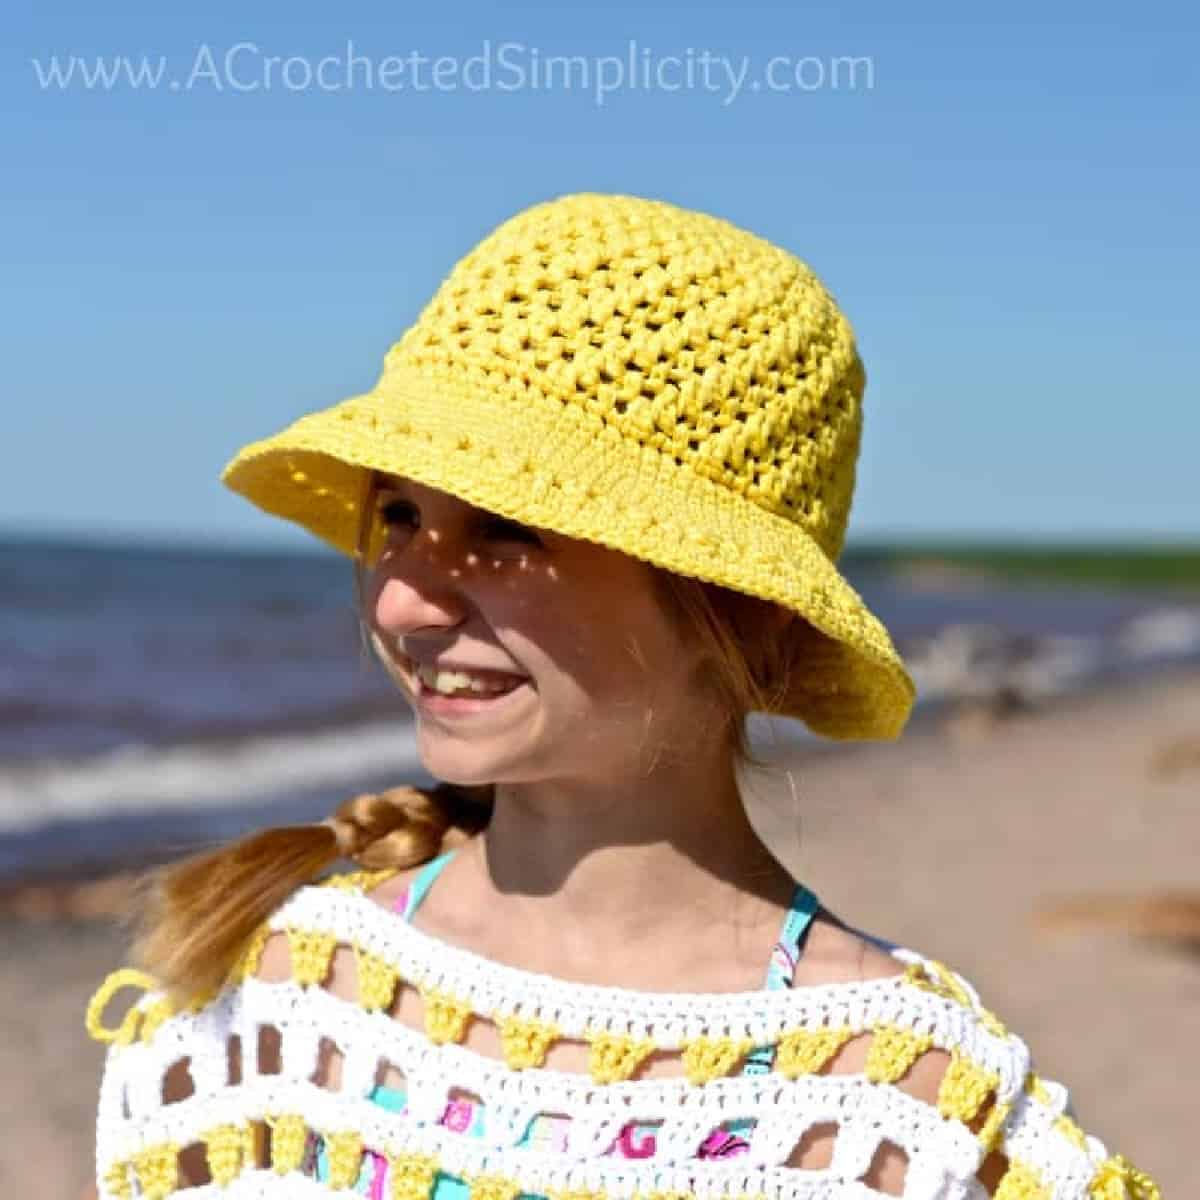 Young girl on the beach modeling a bright yellow crochet sunhat